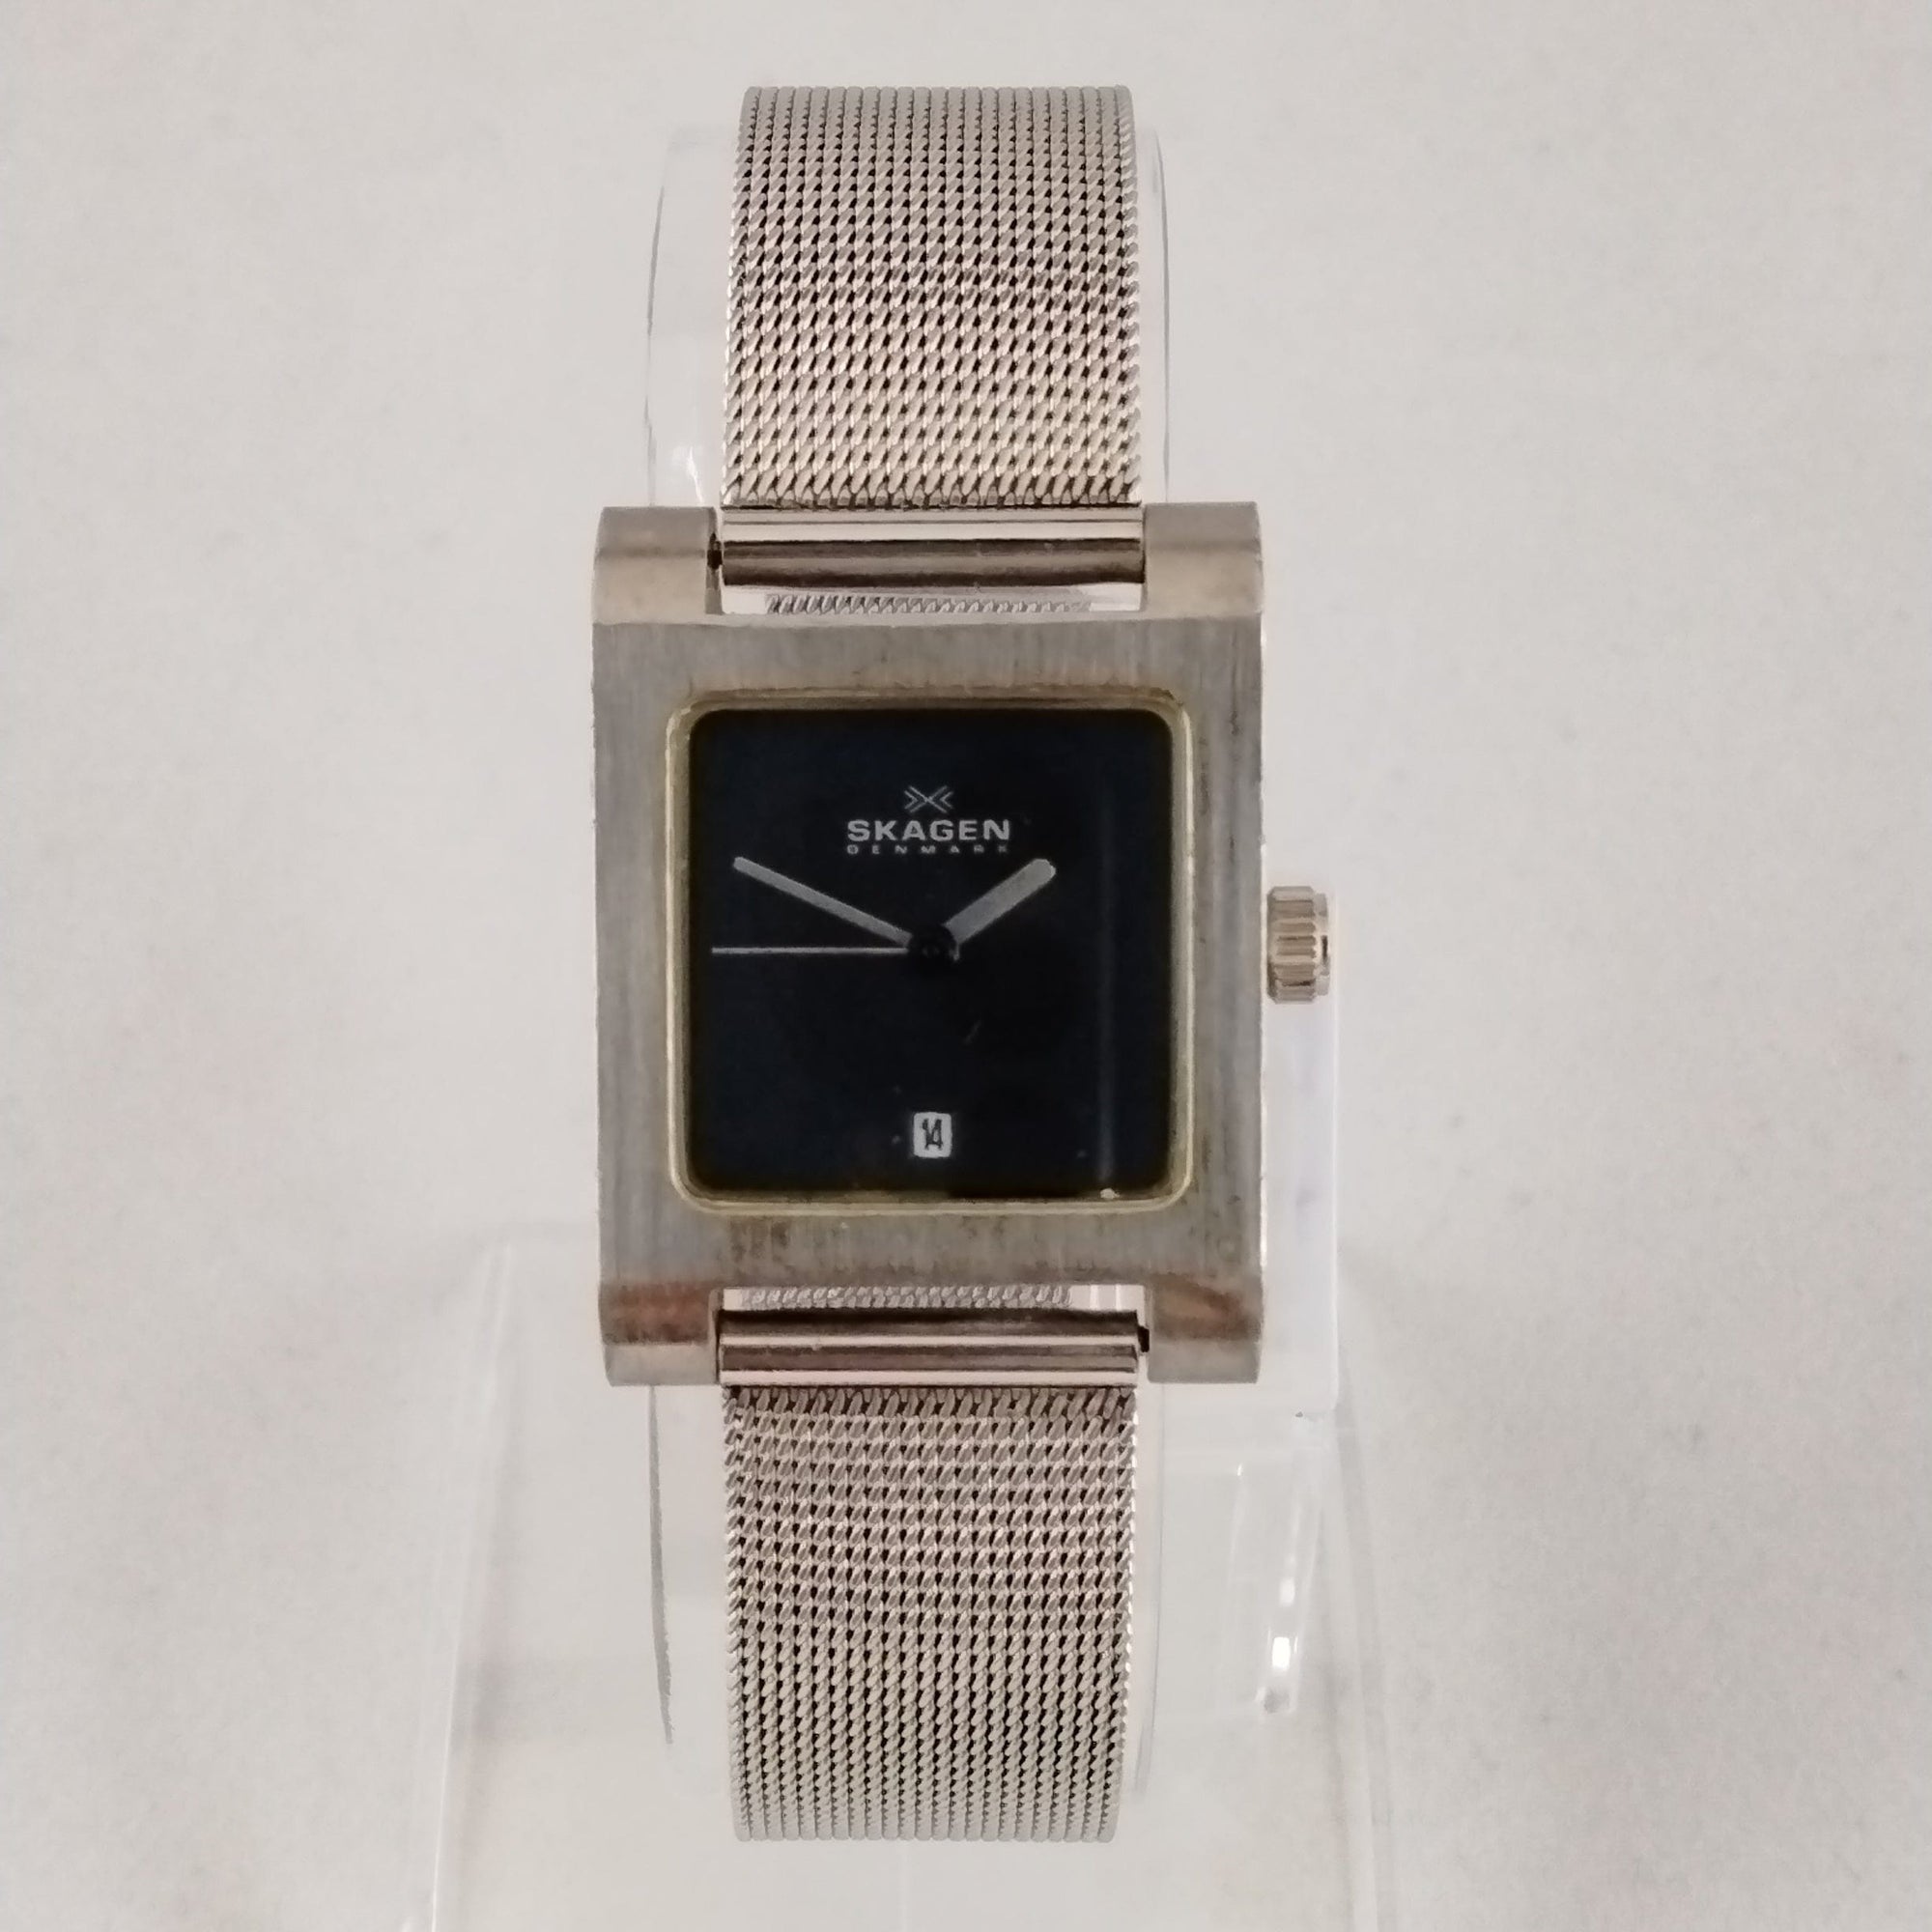 I Like Mikes Mid Century Modern Watches Skagen Men's Stainless Steel Square Watch, Matte Black Dial, Mesh Strap